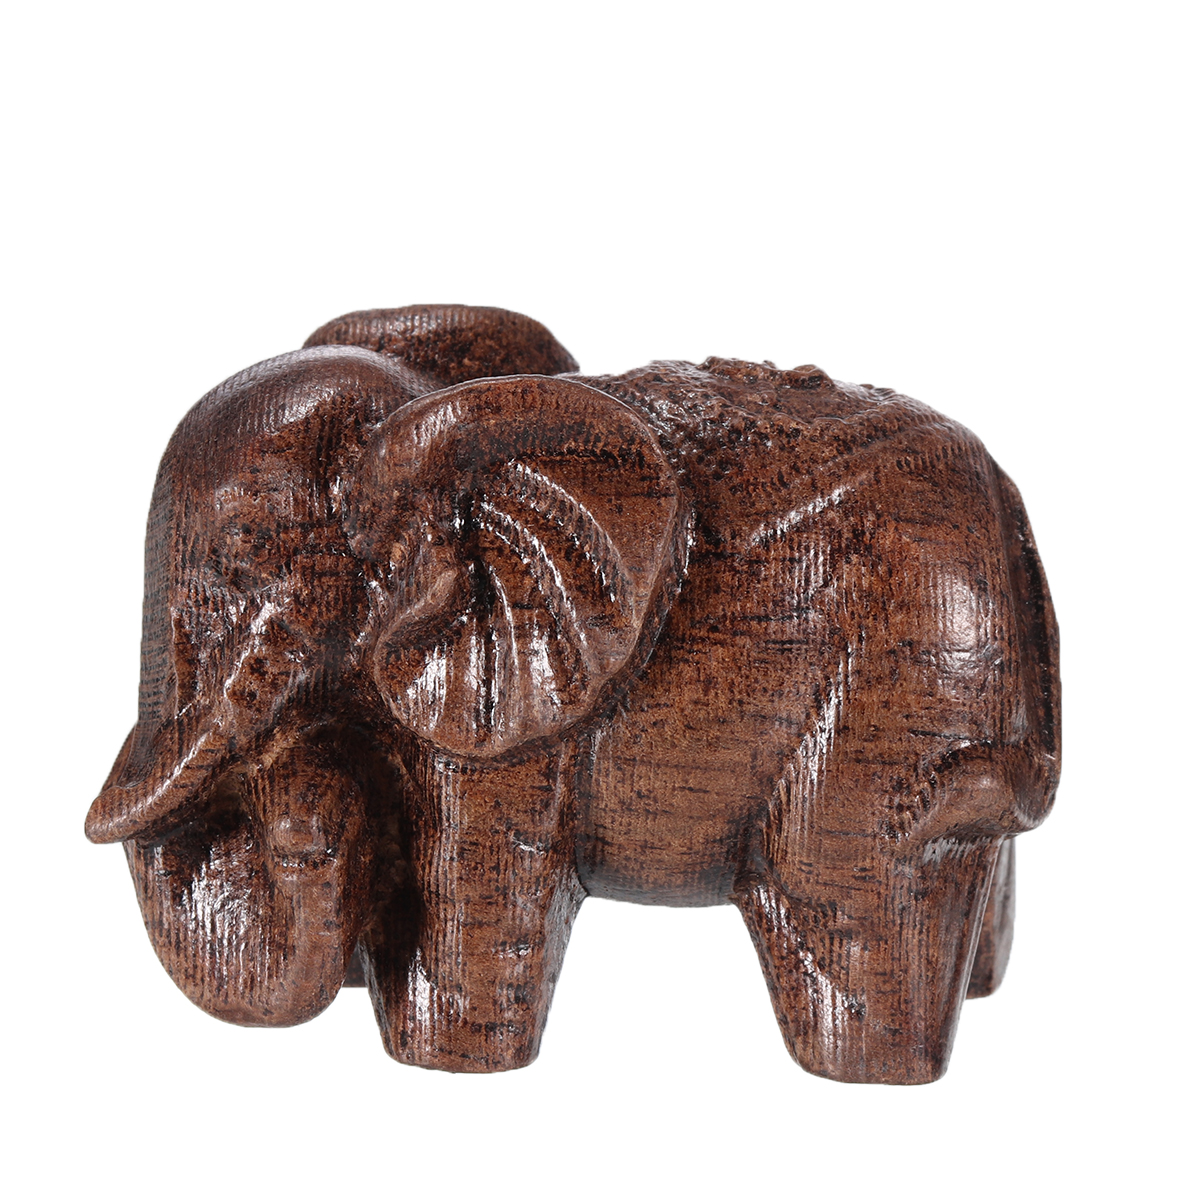 1-Pair-Natural-Agarwood-Elephant-Wood-Carving-Wood-Crafts-Retro-Decoration-Craft-Creative-Gifts-Home-1759099-4